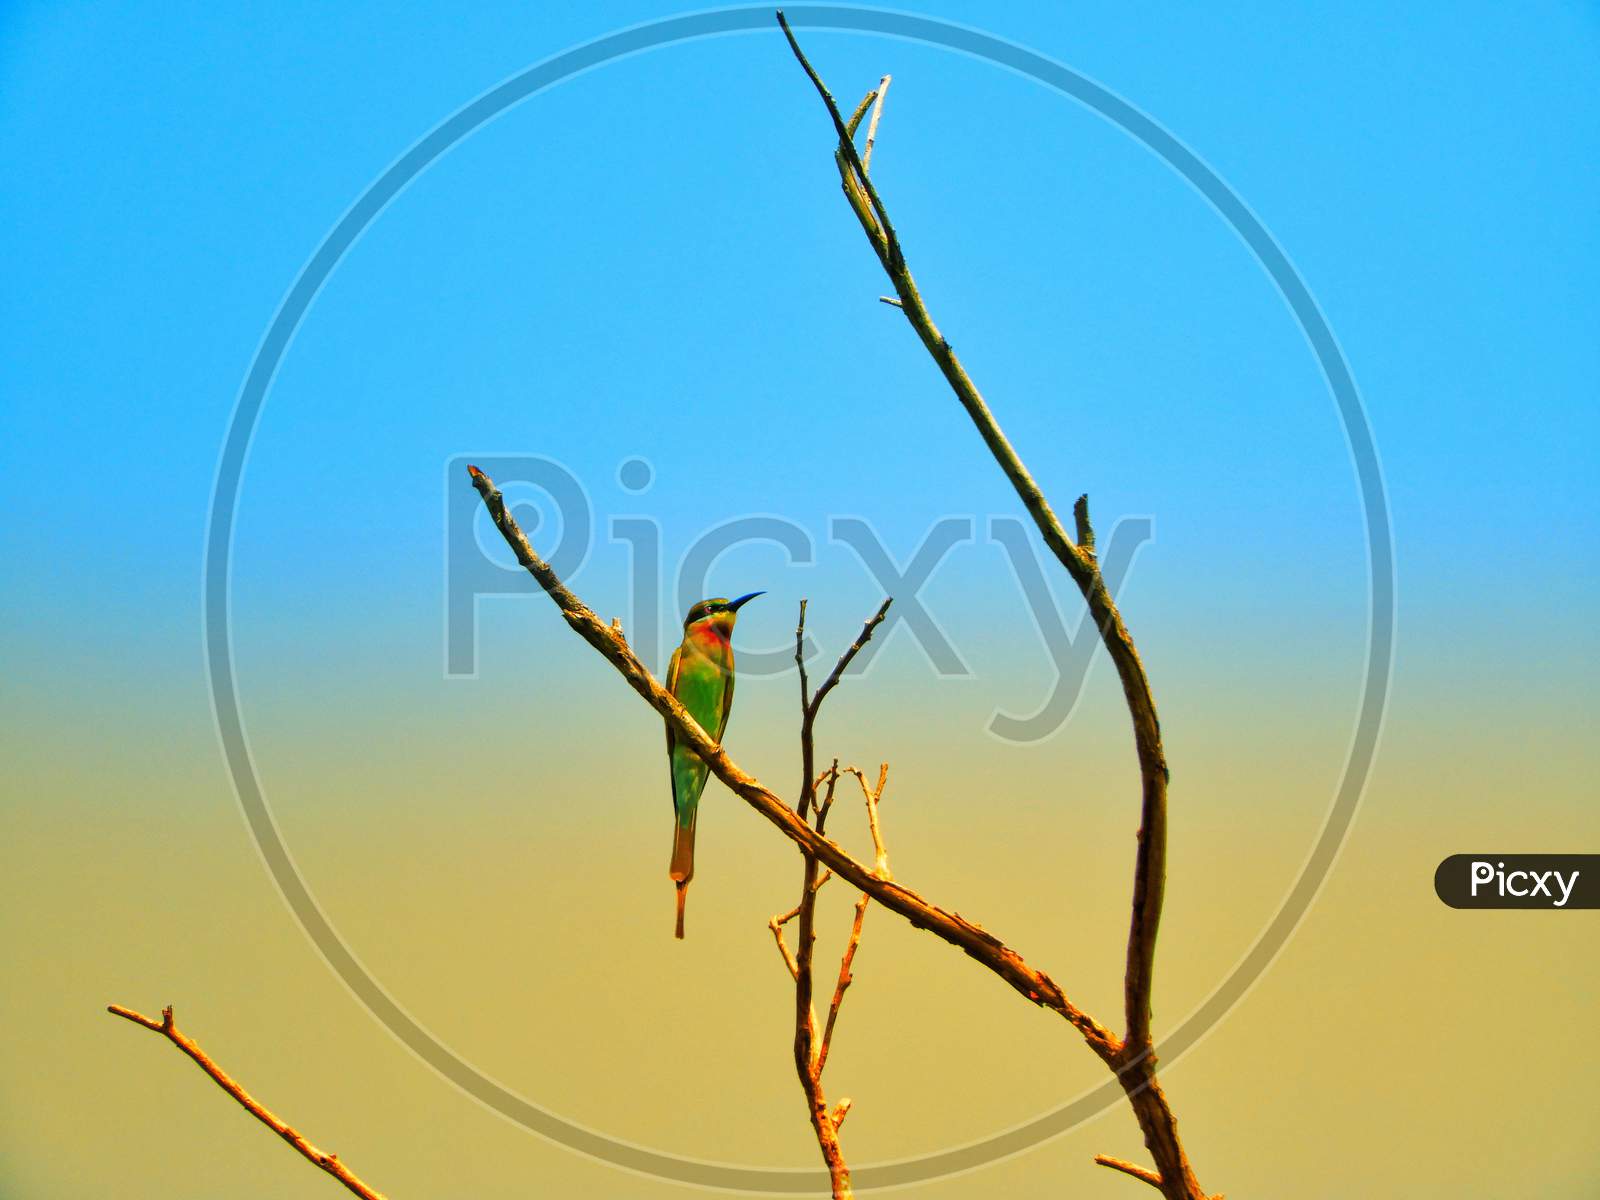 A small bird is sitting on a leafless branch of a tree